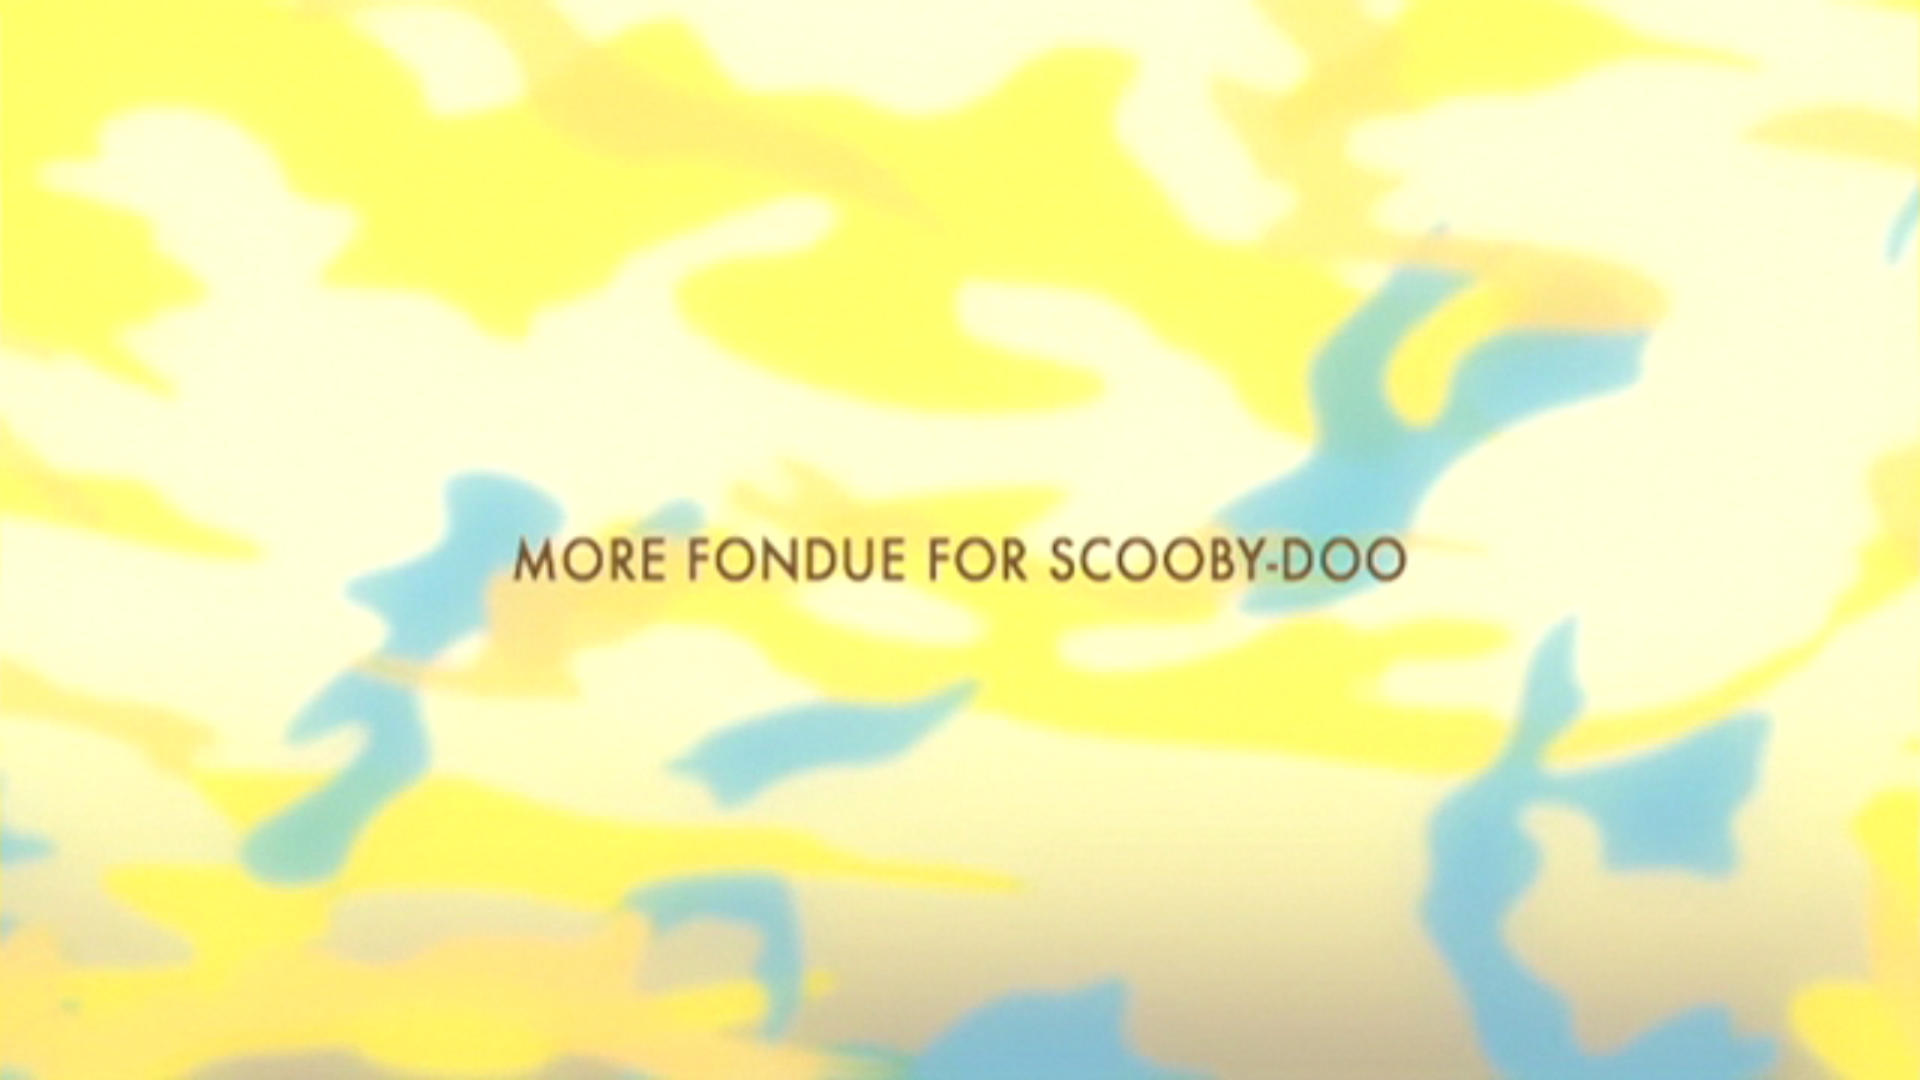   Shaggy &amp; Scooby-Doo Get a Clue!  - Season 1, Episode 2: "More Fondue for Scooby-Doo" - Title Animation by Unknown 